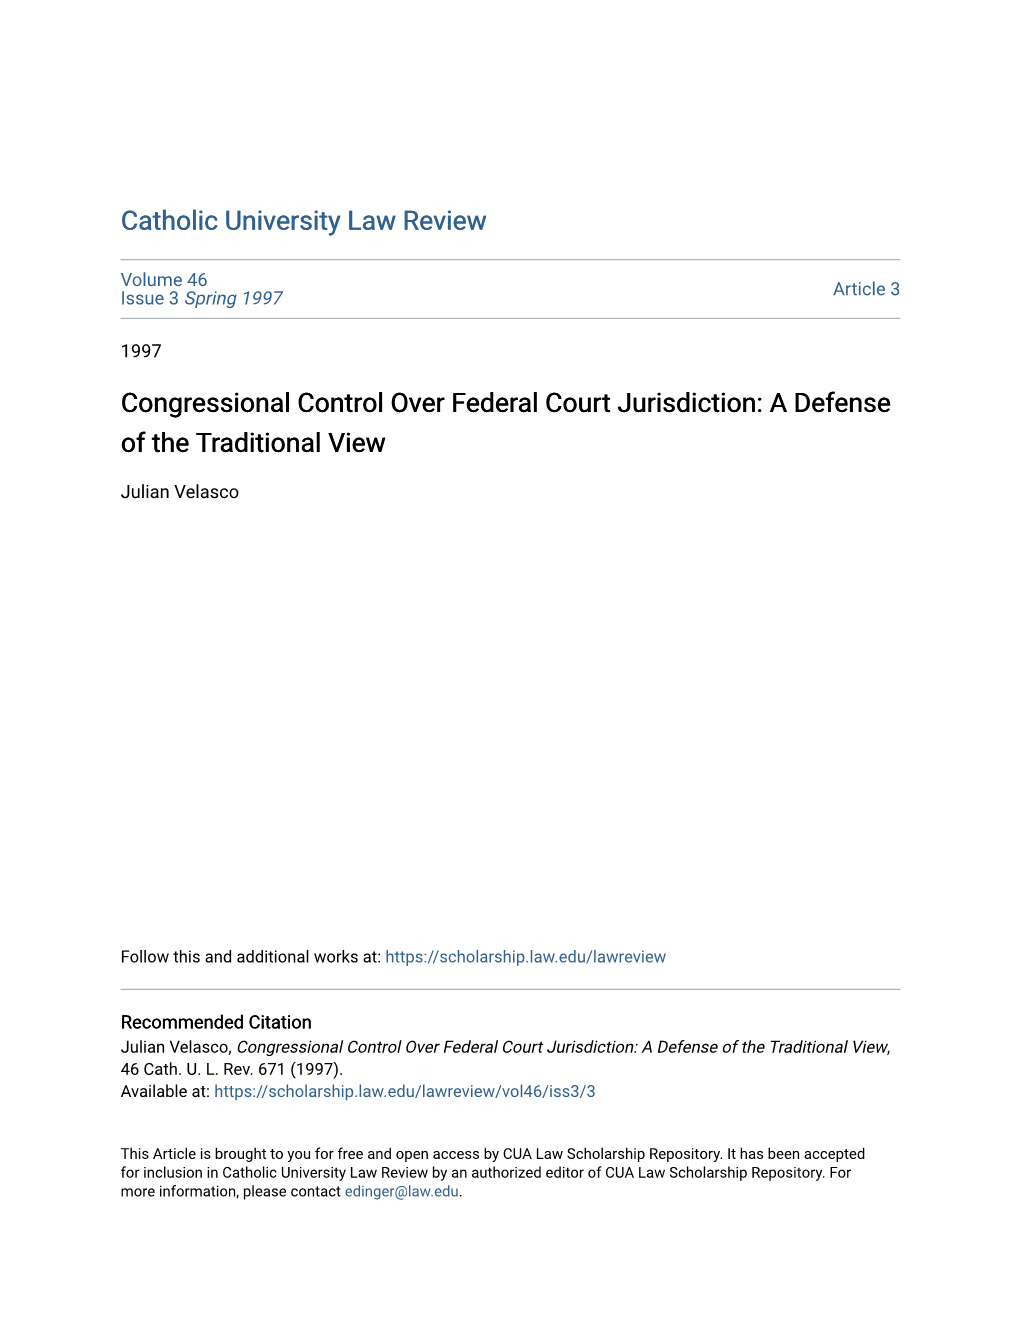 Congressional Control Over Federal Court Jurisdiction: a Defense of the Traditional View